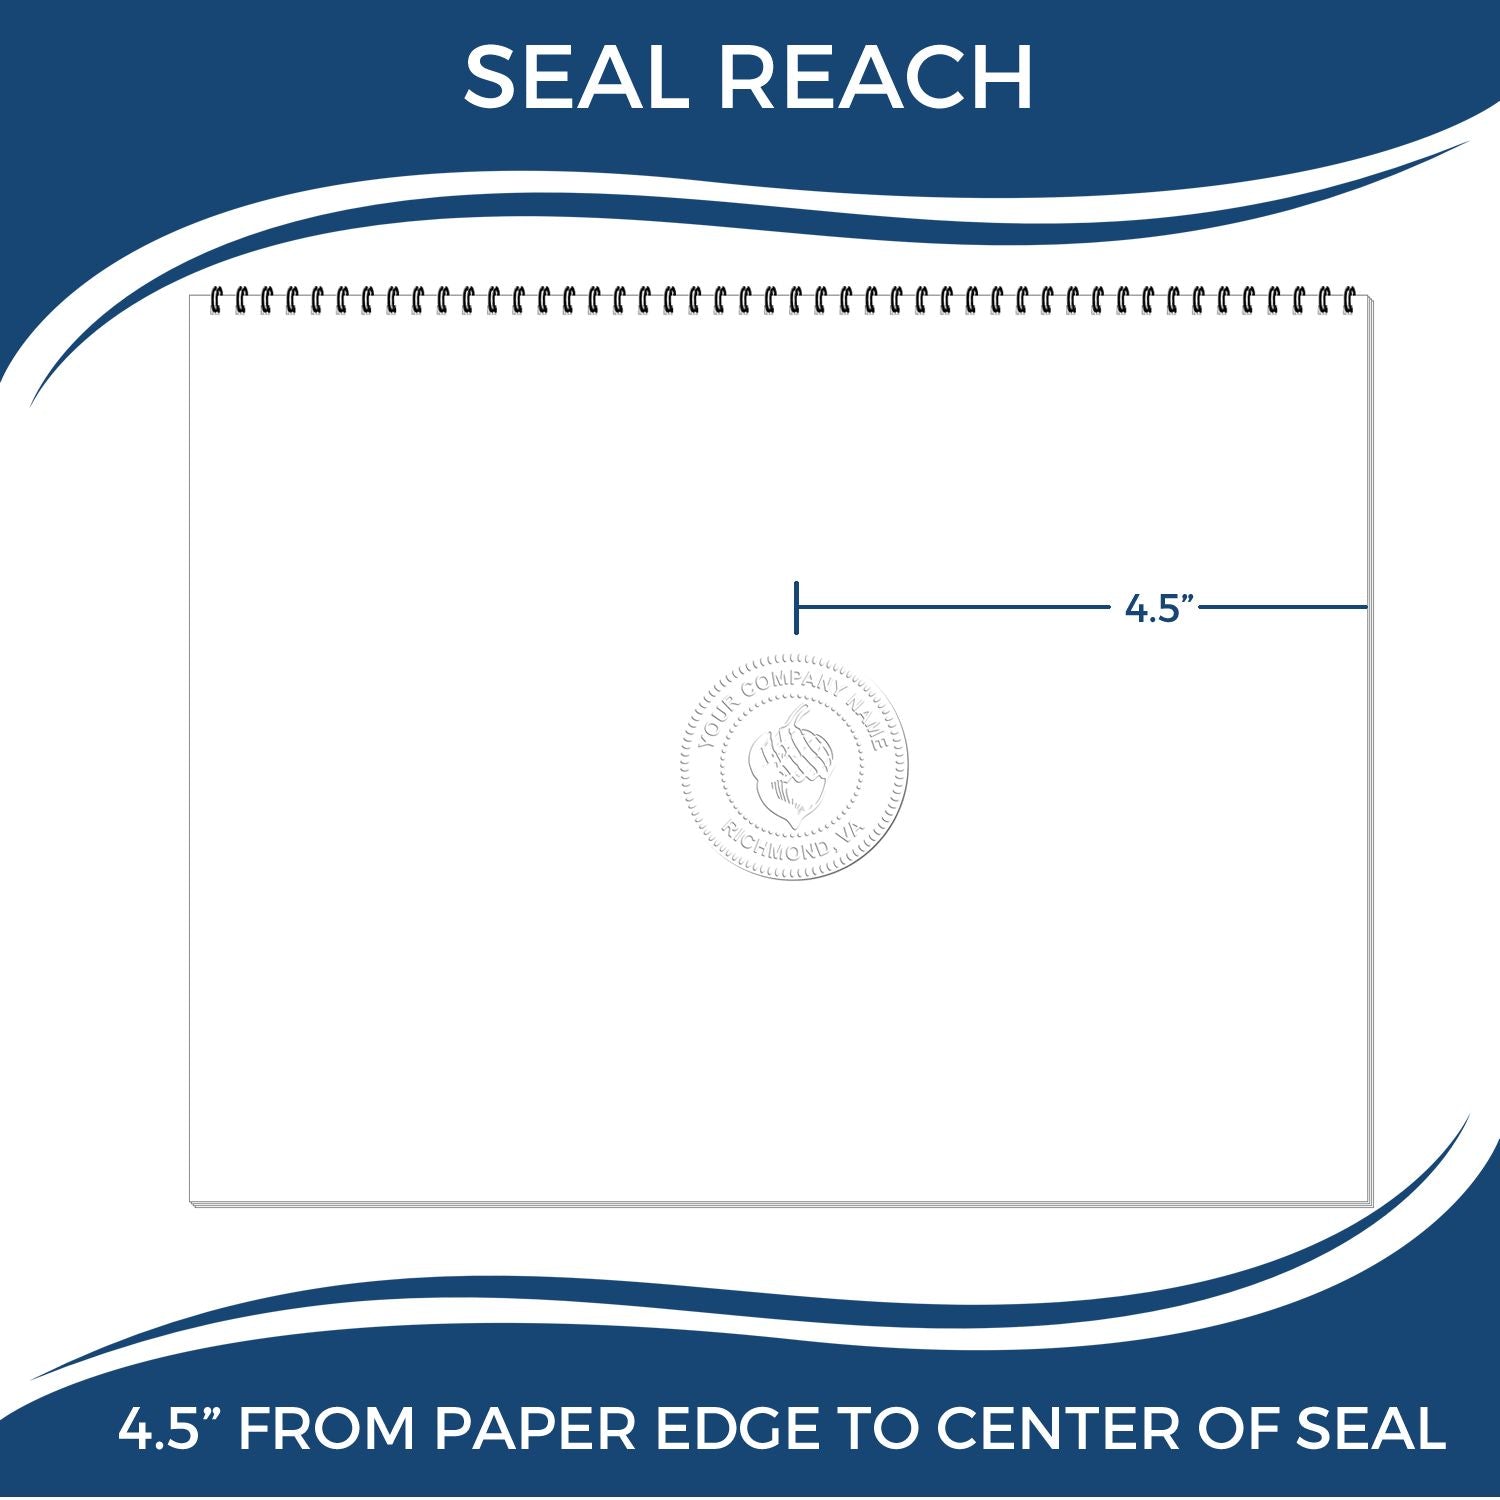 An infographic showing the seal reach which is represented by a ruler and a miniature seal image of the State of Arkansas Extended Long Reach Geologist Seal